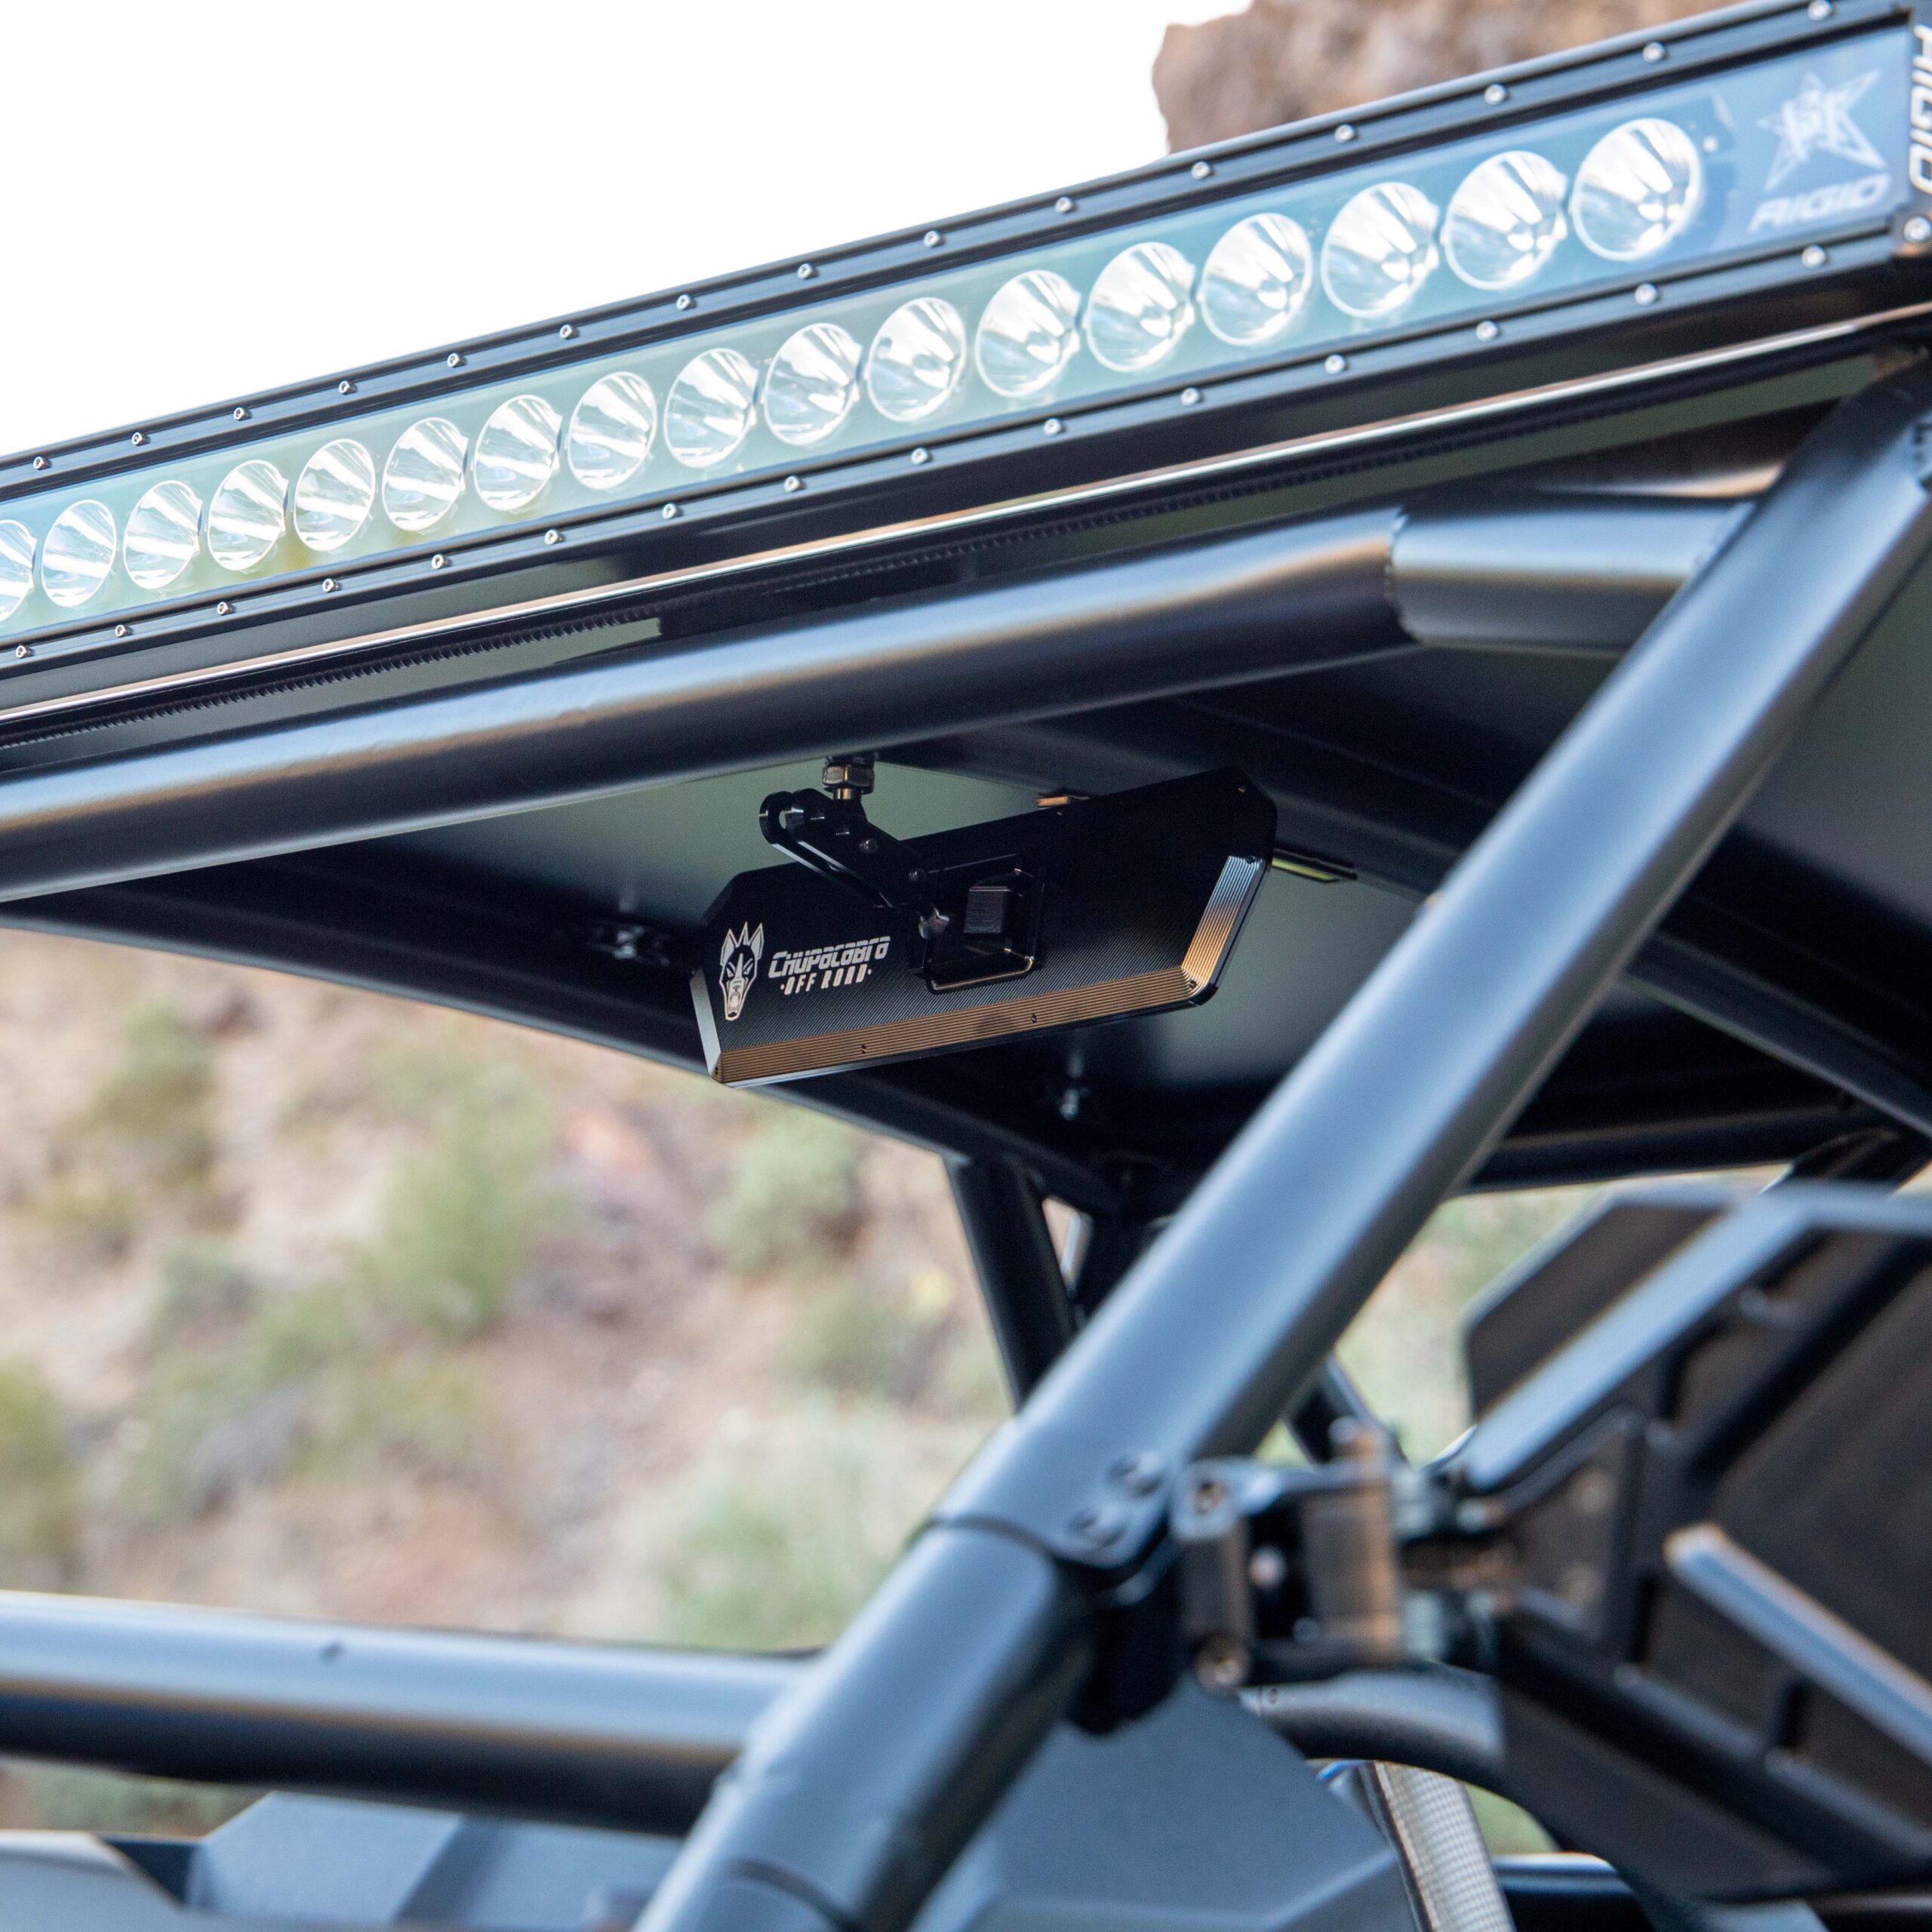 Super DELUXE 11 inch Offroad UTV Center Rearview Mirror 3 scaled